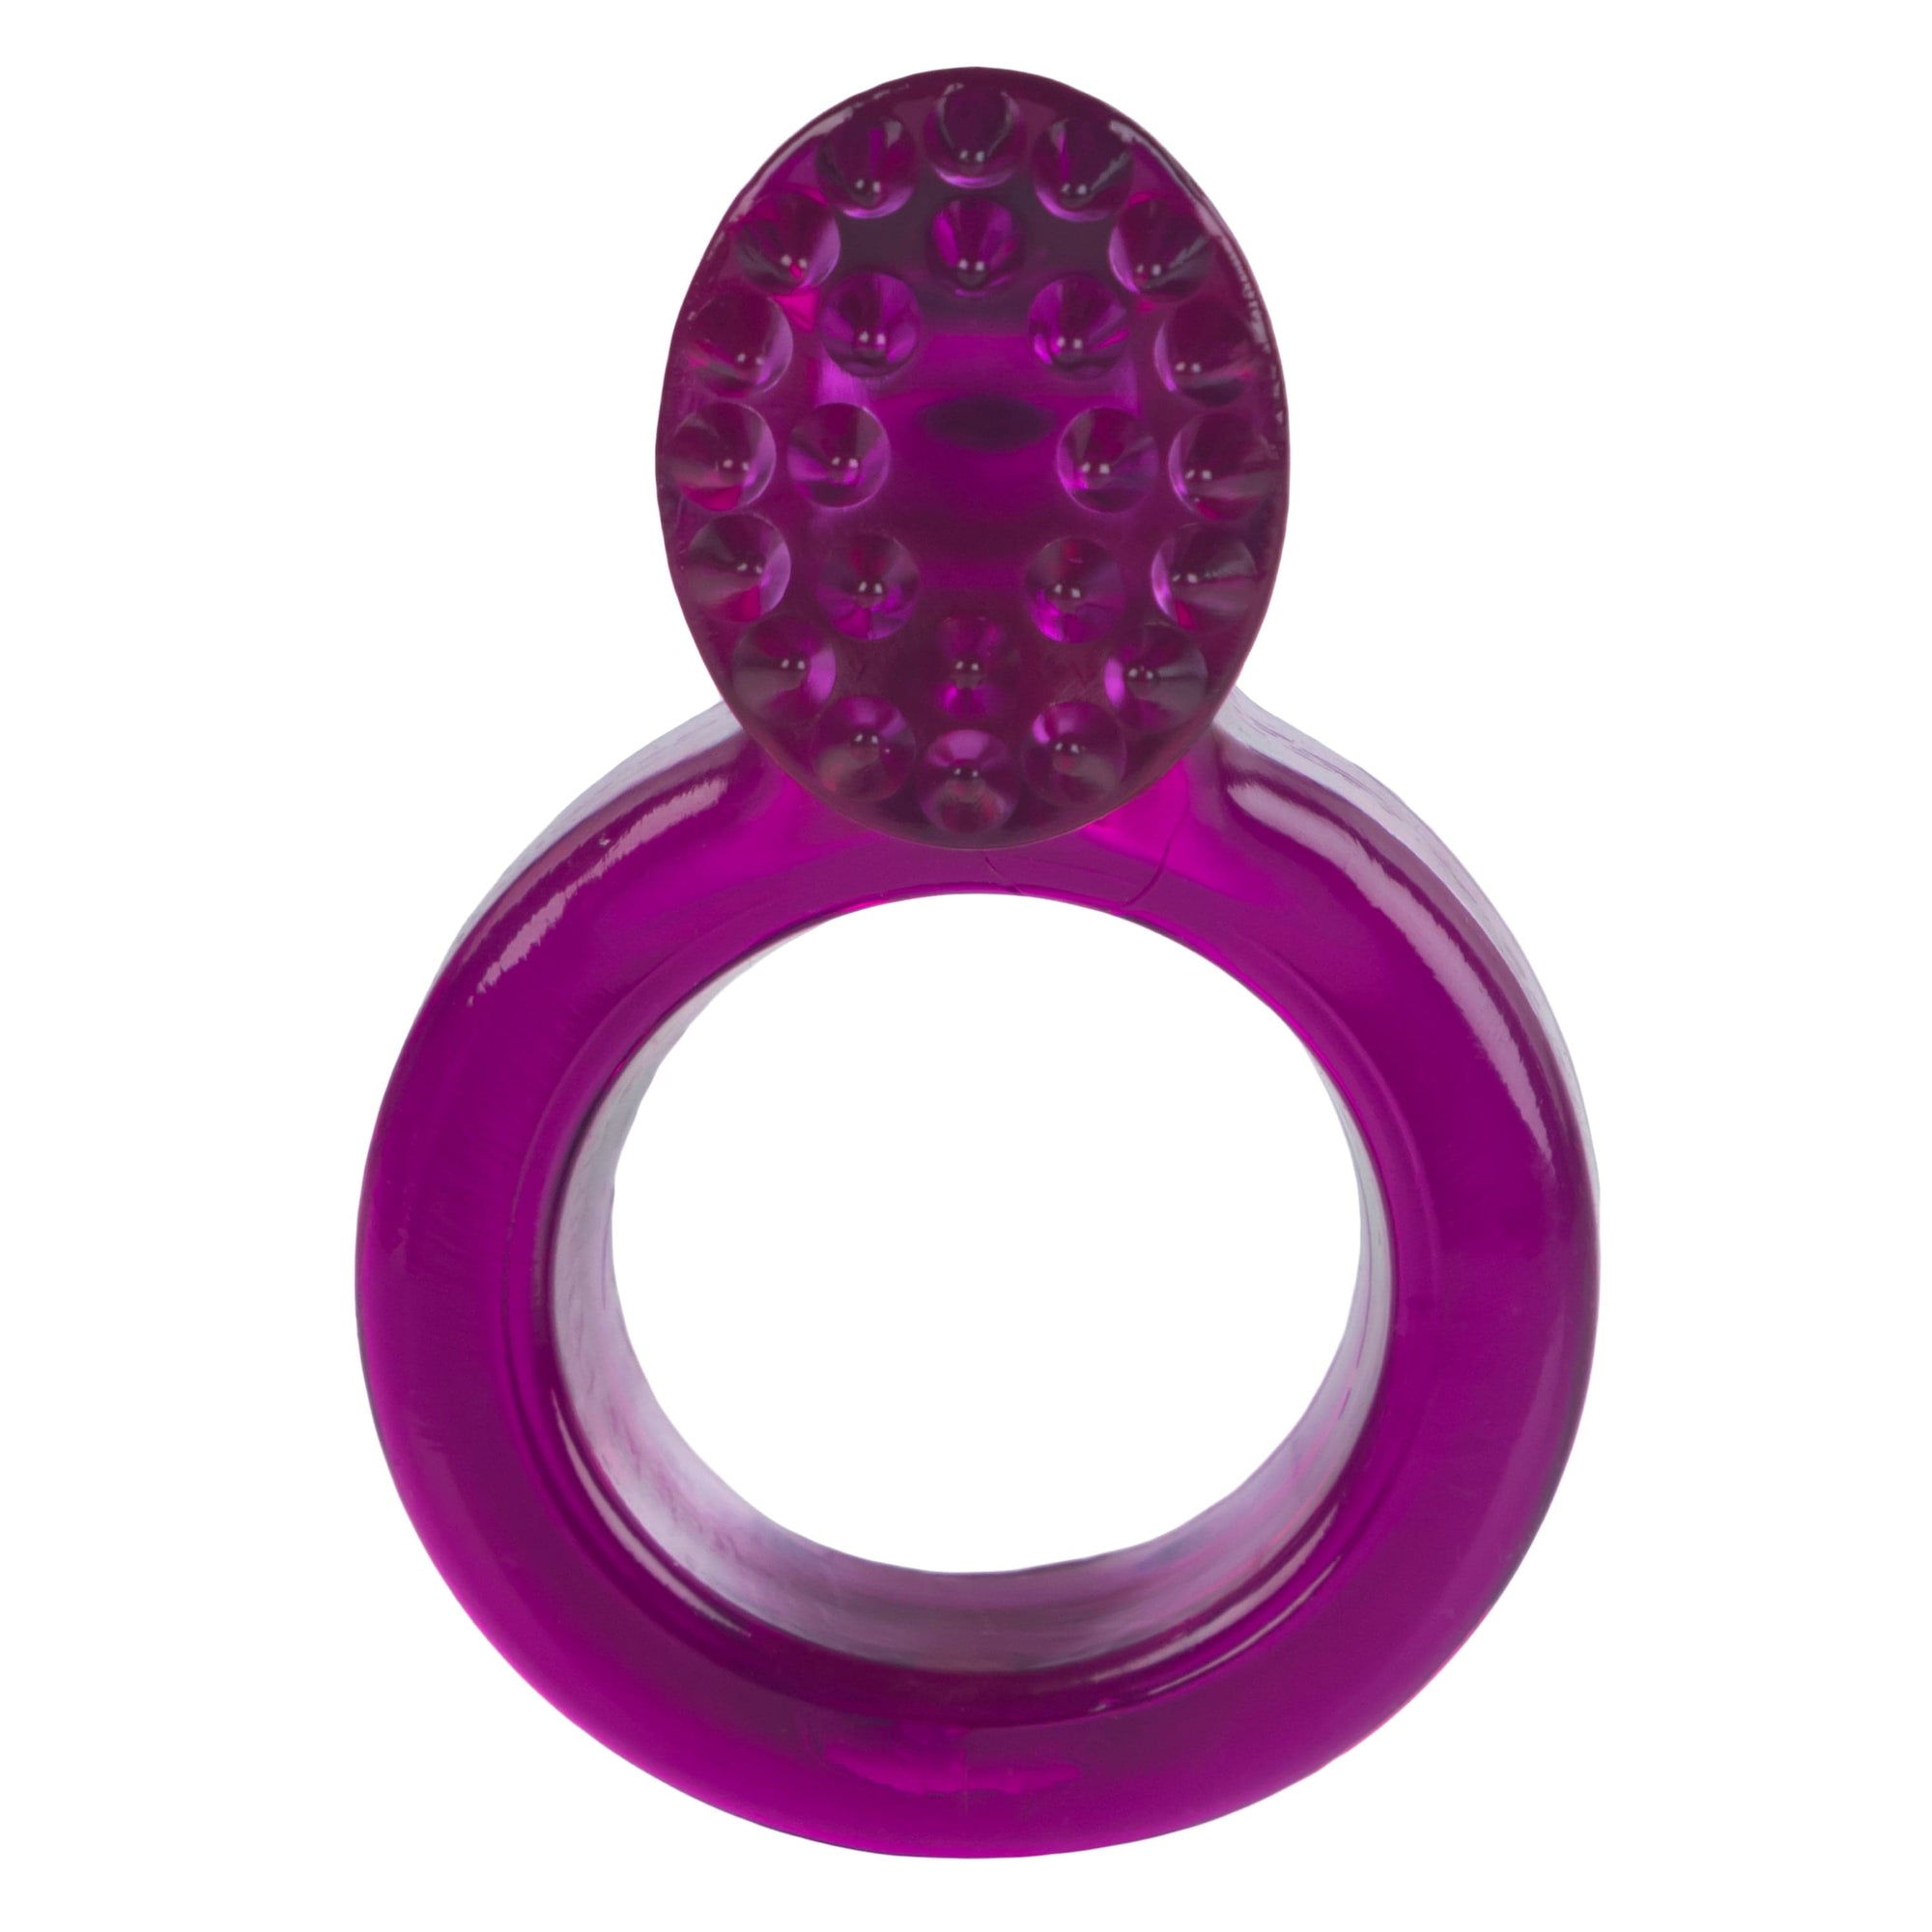 California Exotics - Ring Of Passion Remote Control Cock Ring (Purple) -  Remote Control Cock Ring (Vibration) Non Rechargeable  Durio.sg